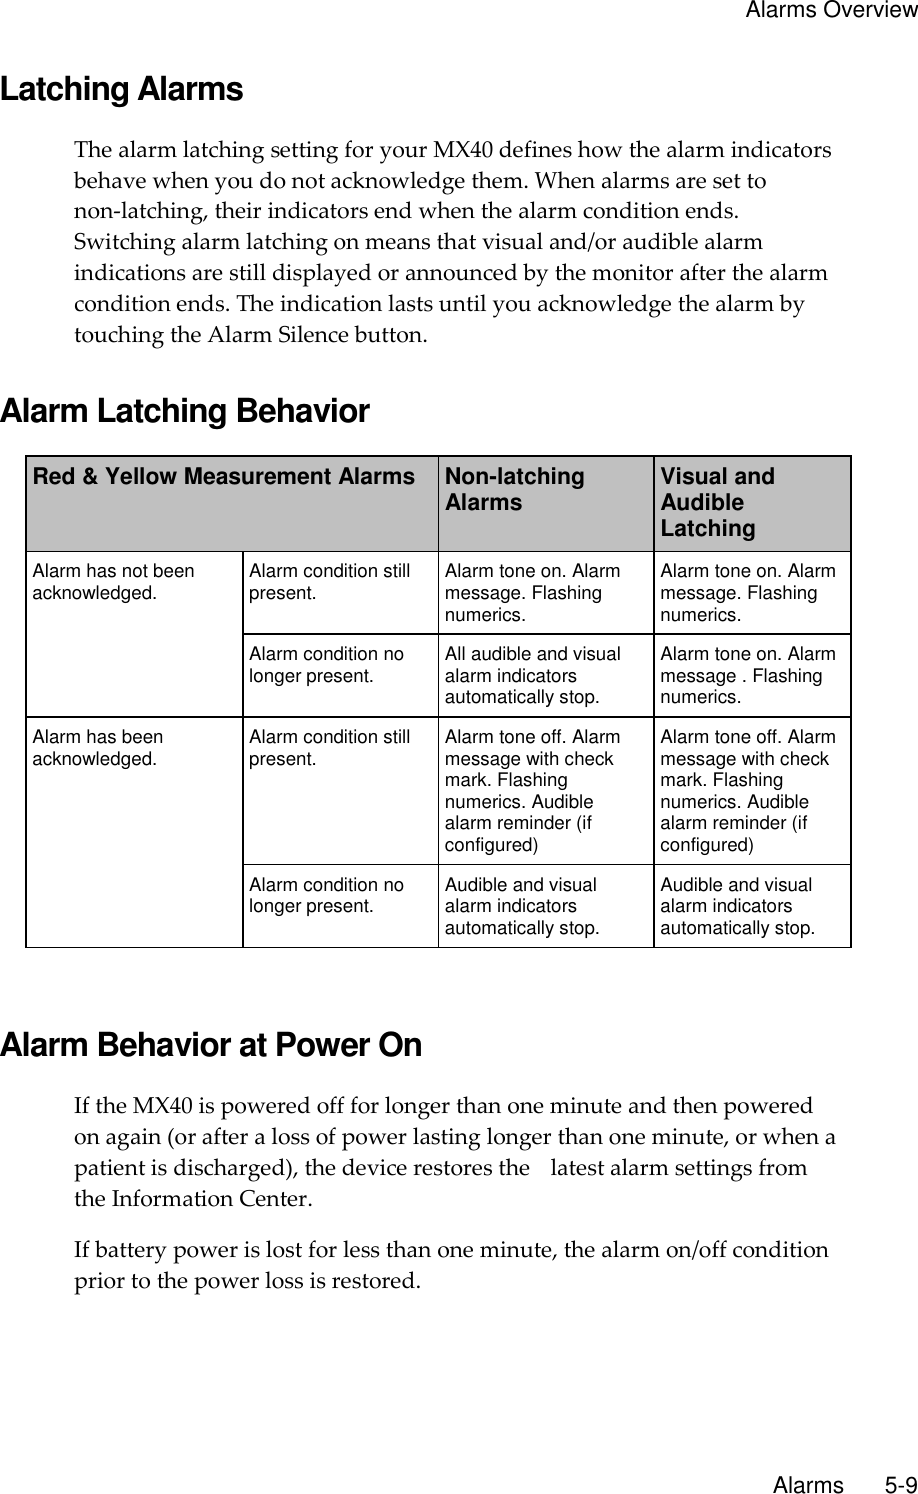     Alarms Overview       Alarms       5-9 Latching Alarms The alarm latching setting for your MX40 defines how the alarm indicators behave when you do not acknowledge them. When alarms are set to non-latching, their indicators end when the alarm condition ends. Switching alarm latching on means that visual and/or audible alarm indications are still displayed or announced by the monitor after the alarm condition ends. The indication lasts until you acknowledge the alarm by touching the Alarm Silence button.  Alarm Latching Behavior Red &amp; Yellow Measurement Alarms  Non-latching Alarms Visual and Audible Latching Alarm has not been acknowledged.  Alarm condition still present. Alarm tone on. Alarm message. Flashing numerics. Alarm tone on. Alarm message. Flashing numerics. Alarm condition no longer present. All audible and visual alarm indicators automatically stop. Alarm tone on. Alarm message . Flashing numerics. Alarm has been acknowledged.  Alarm condition still present. Alarm tone off. Alarm message with check mark. Flashing numerics. Audible alarm reminder (if configured) Alarm tone off. Alarm message with check mark. Flashing numerics. Audible alarm reminder (if configured) Alarm condition no longer present. Audible and visual alarm indicators automatically stop. Audible and visual alarm indicators automatically stop.   Alarm Behavior at Power On If the MX40 is powered off for longer than one minute and then powered on again (or after a loss of power lasting longer than one minute, or when a patient is discharged), the device restores the    latest alarm settings from the Information Center. If battery power is lost for less than one minute, the alarm on/off condition prior to the power loss is restored.  